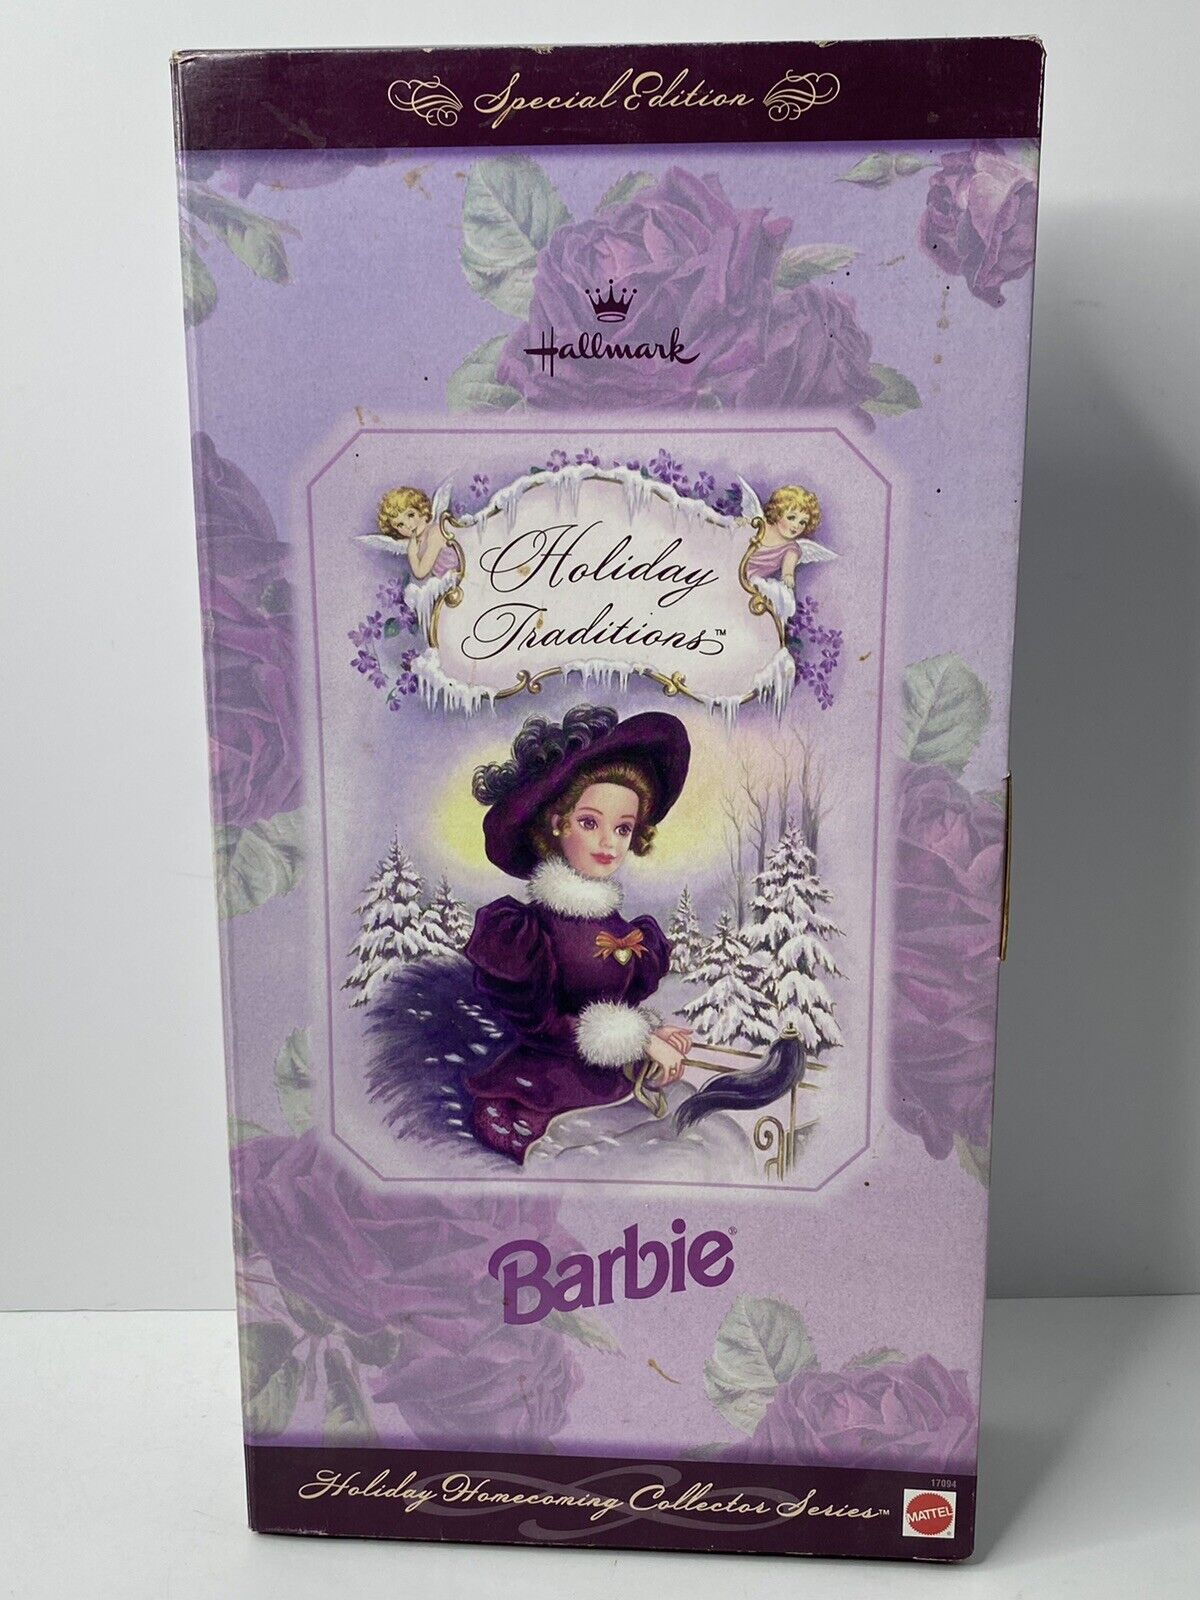 Holiday Traditions 1996 Barbie Doll for sale online